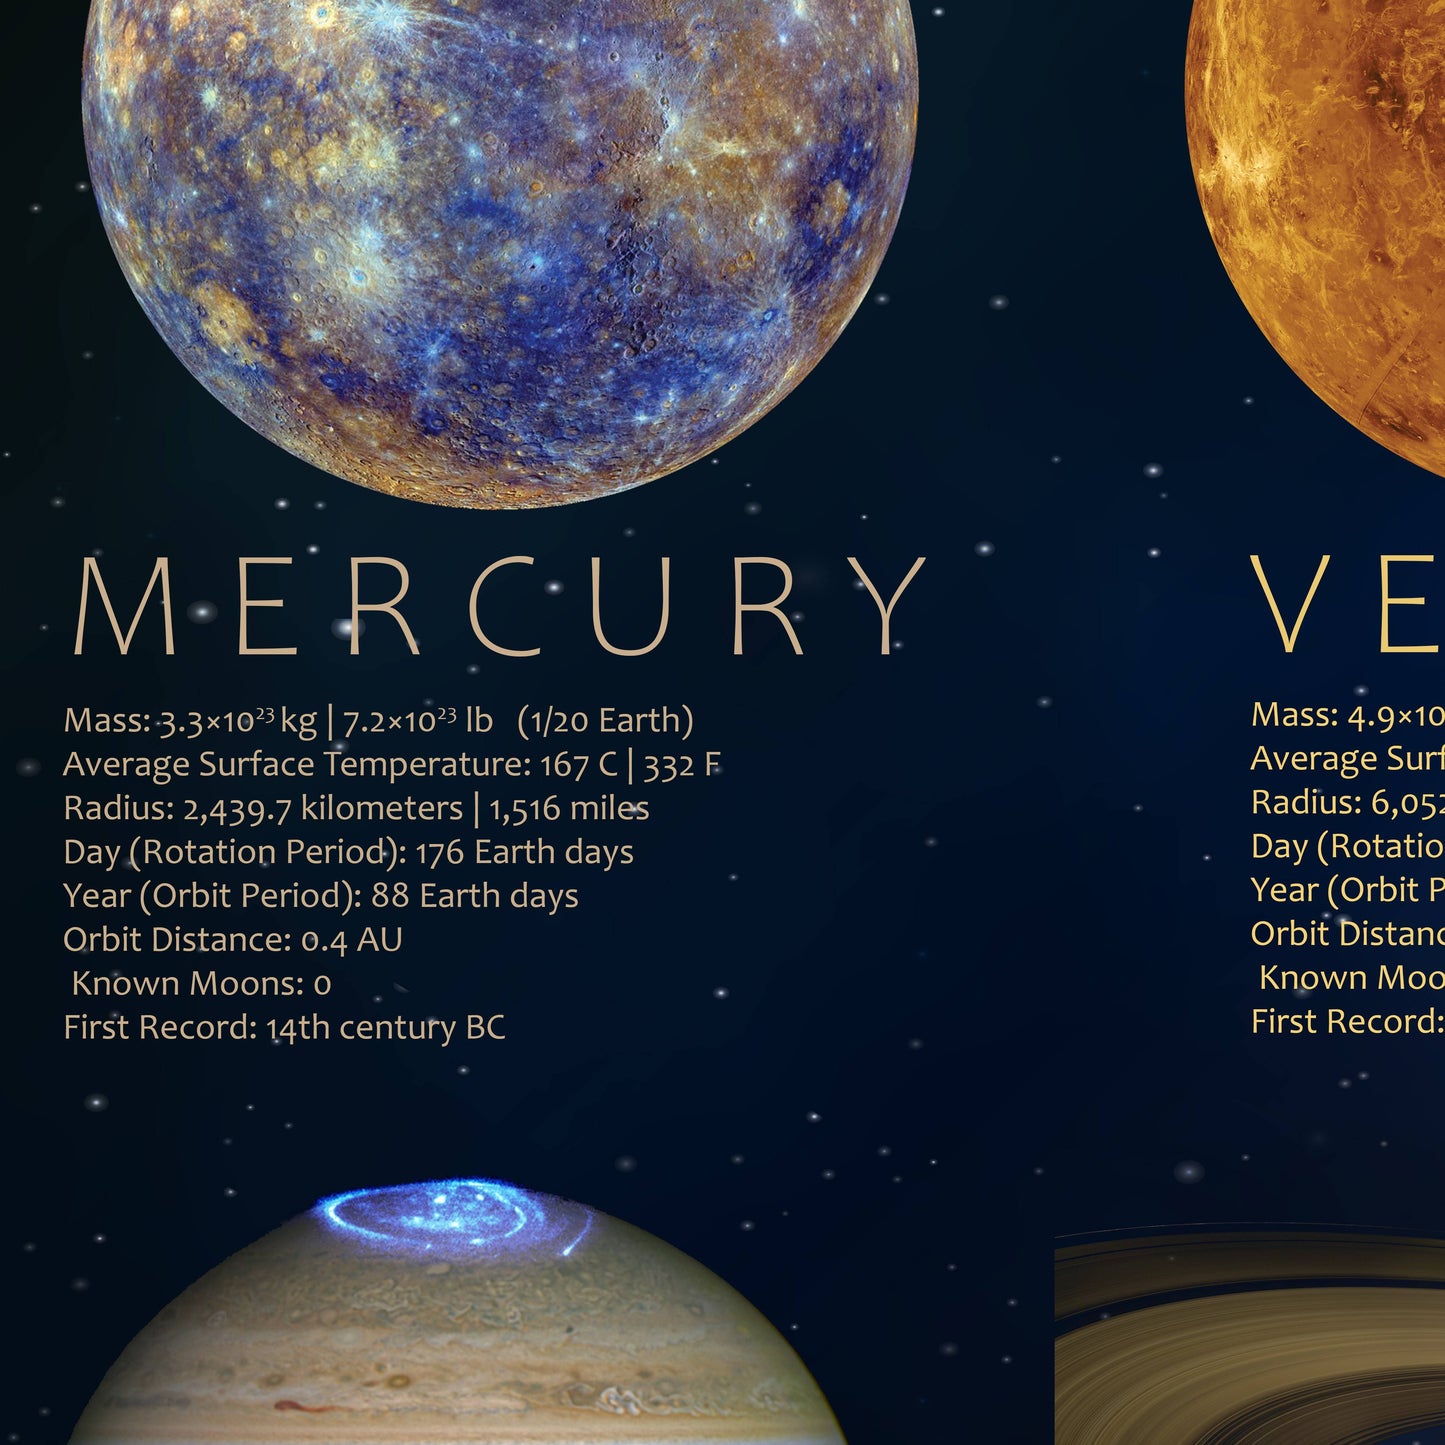 The Planets Of Our Solar System Poster